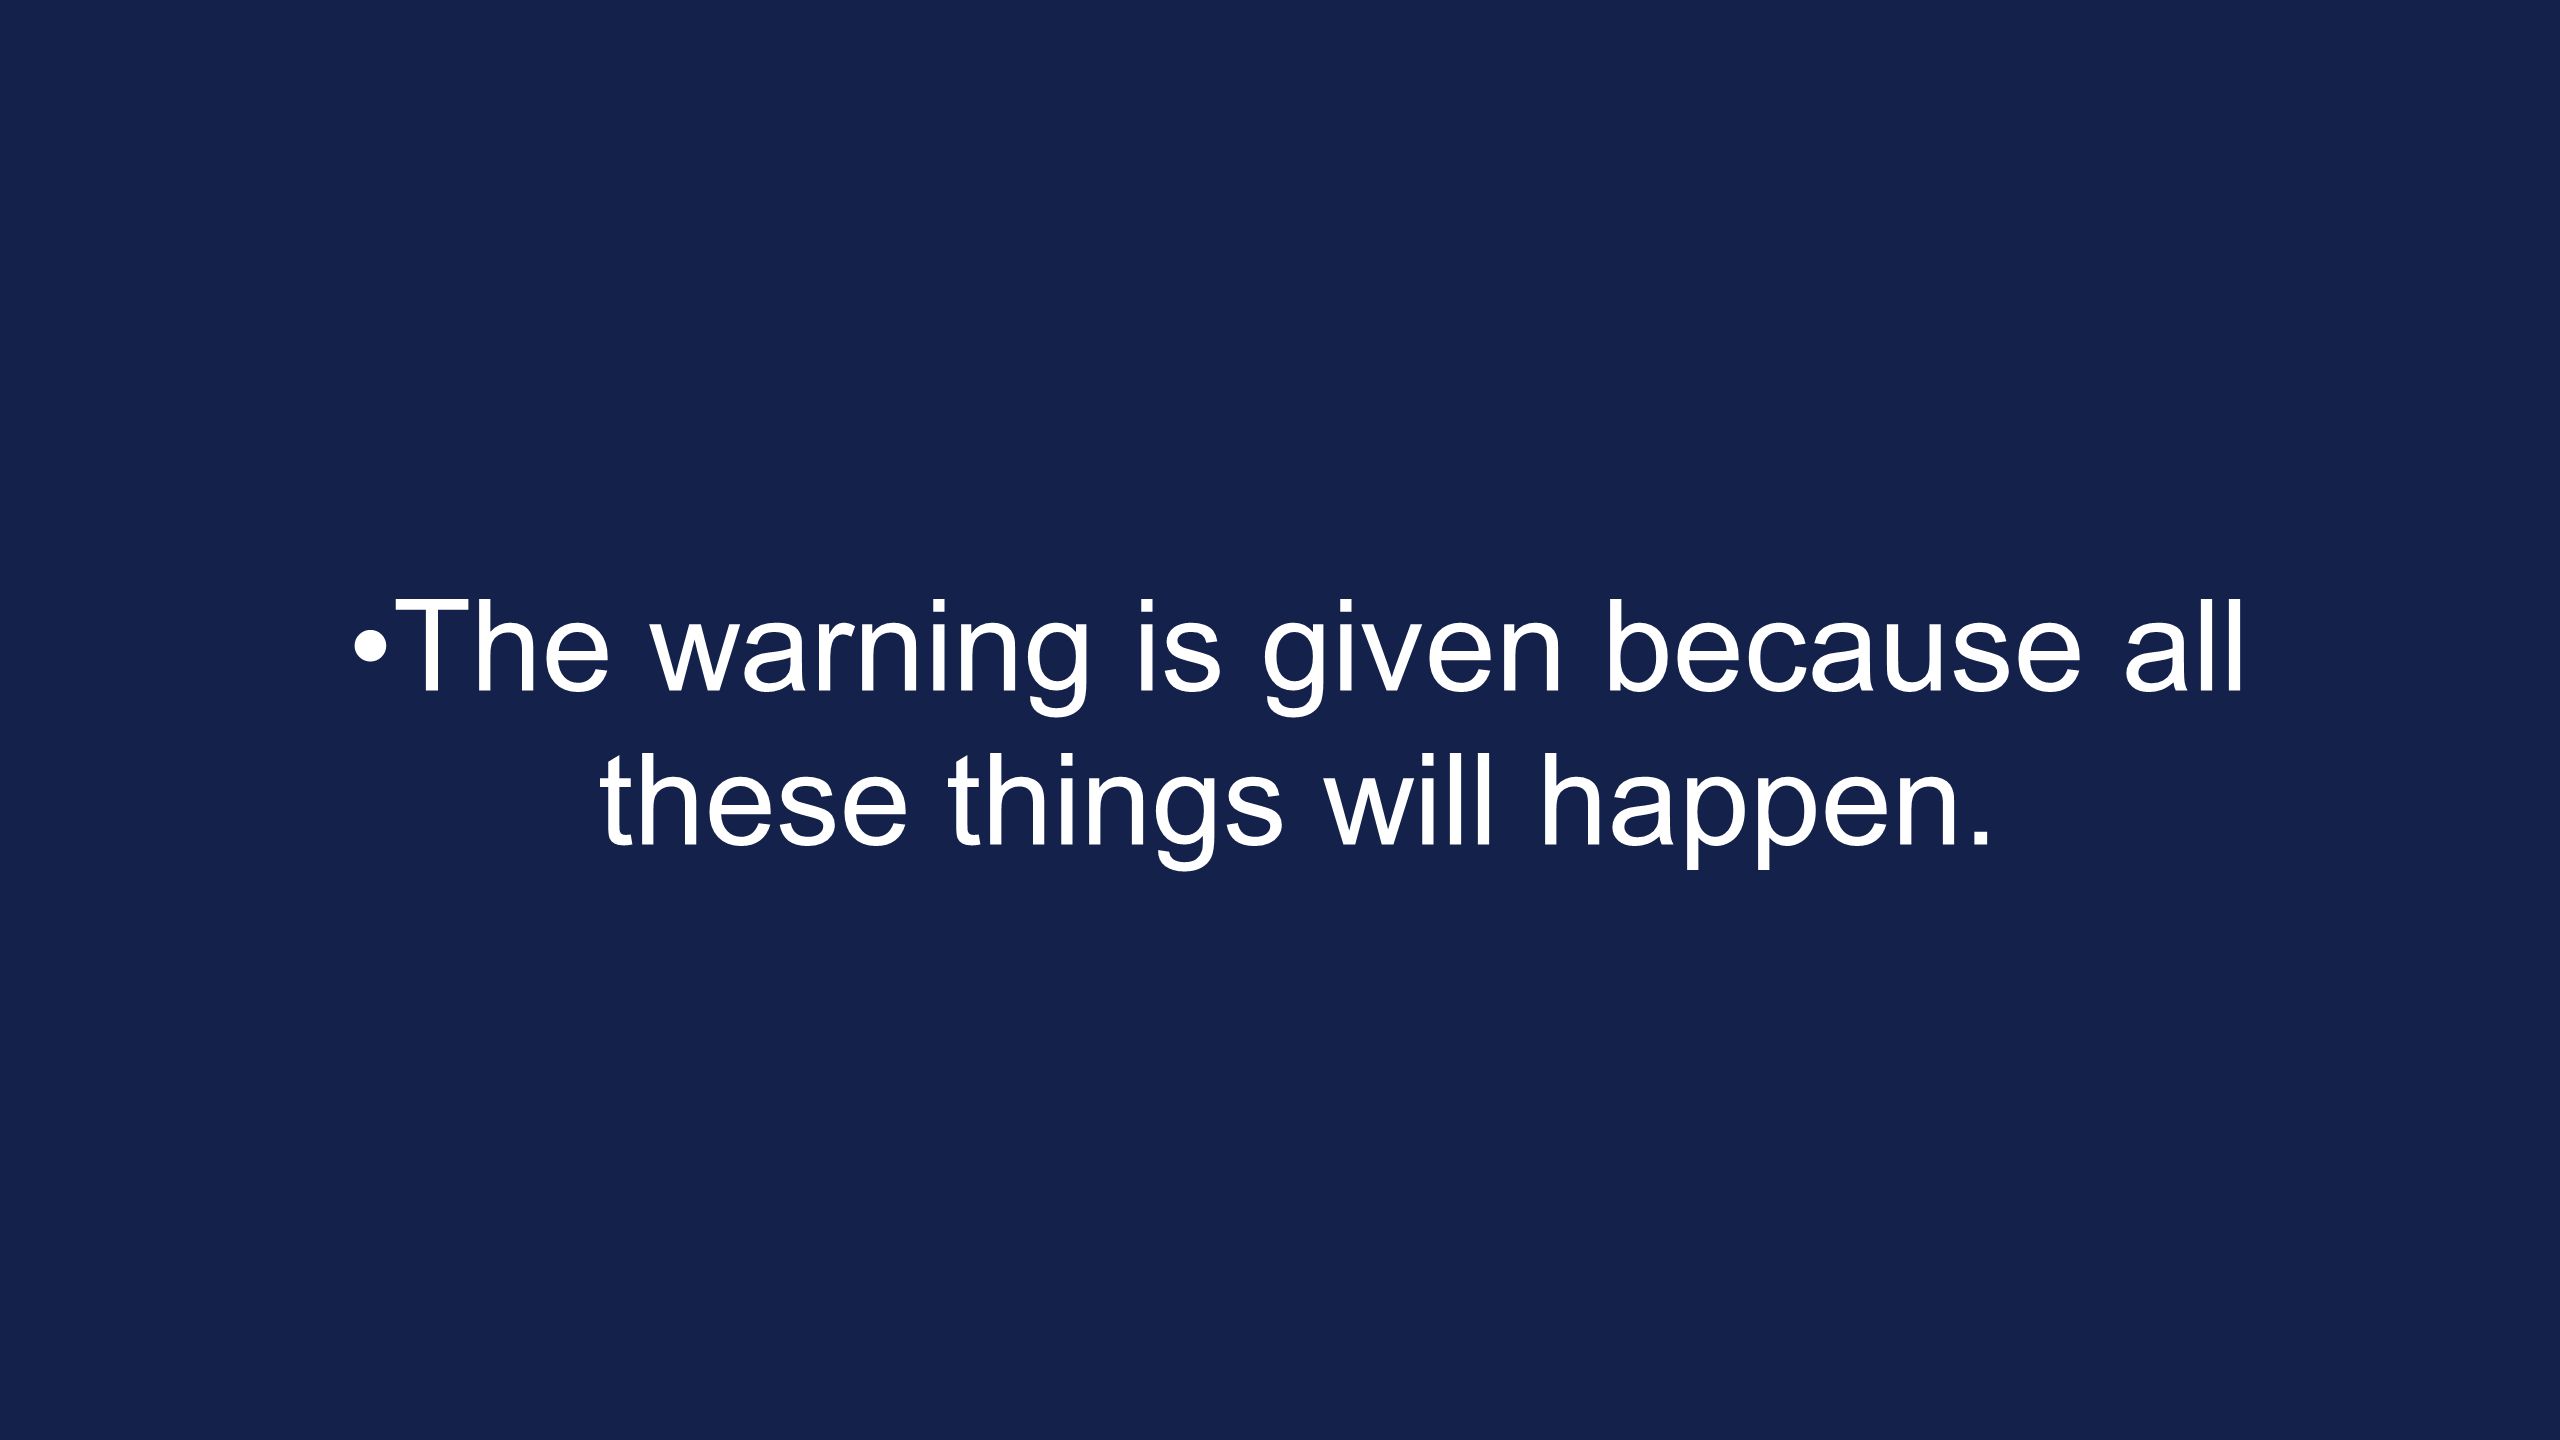 The warning is given because all these things will happen.